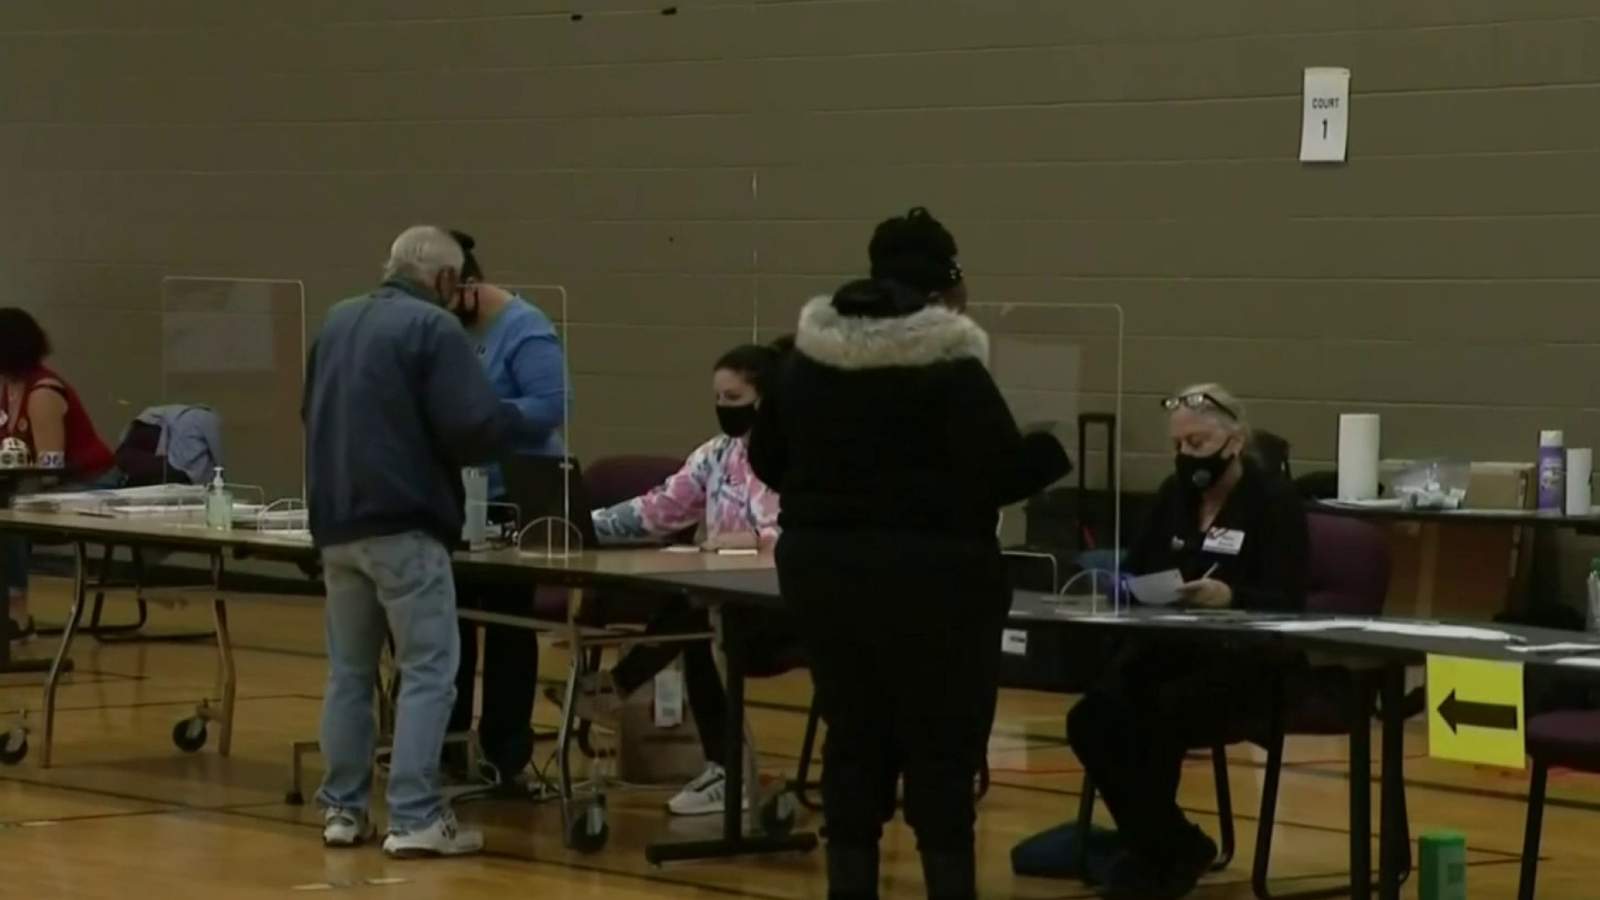 Michigan Secretary of State says audits confirm accurate election results